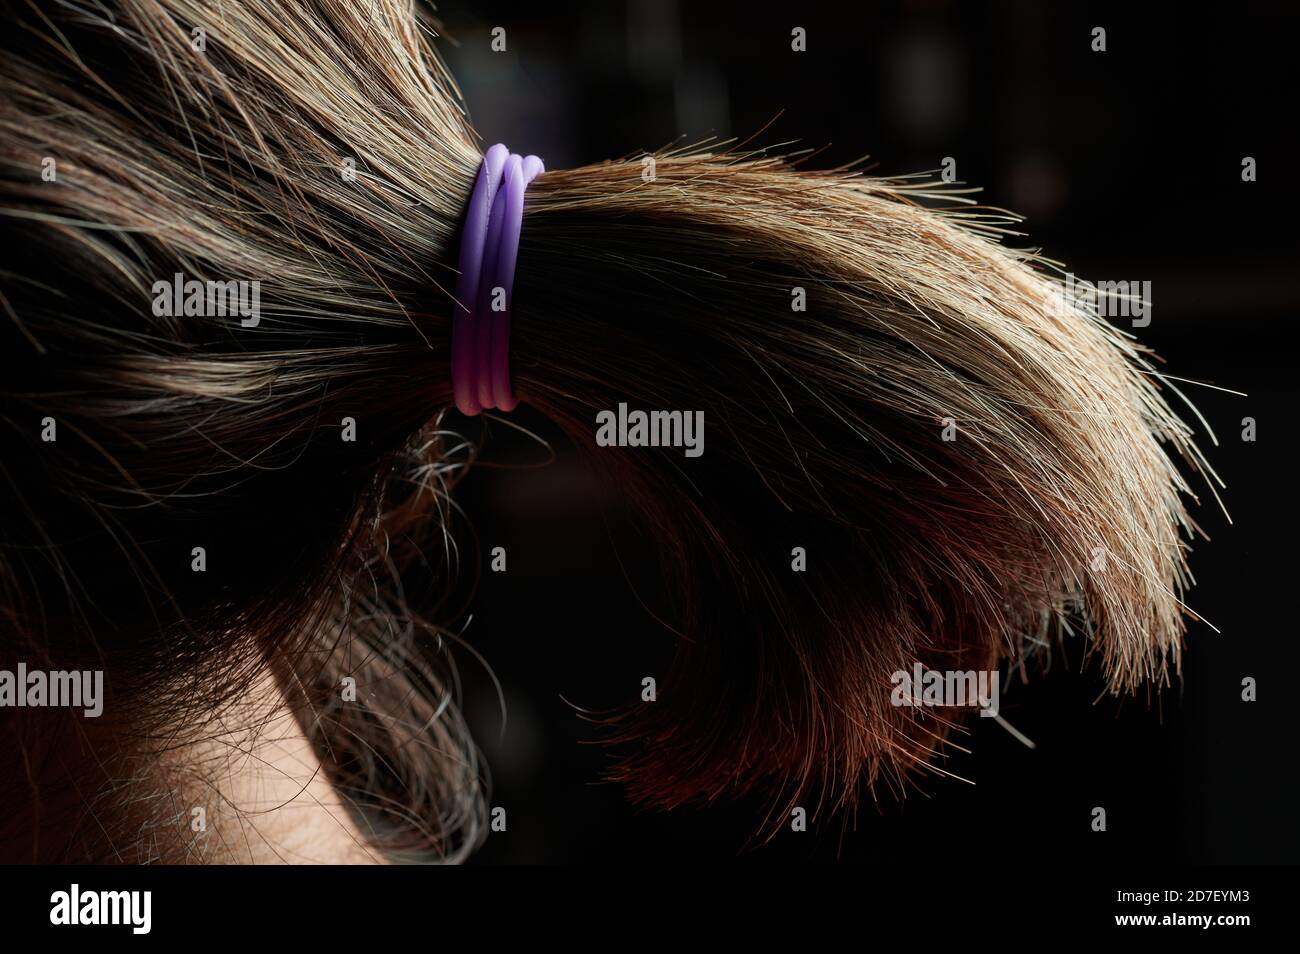 Pony tail hairstyle side view of dark color hair Stock Photo